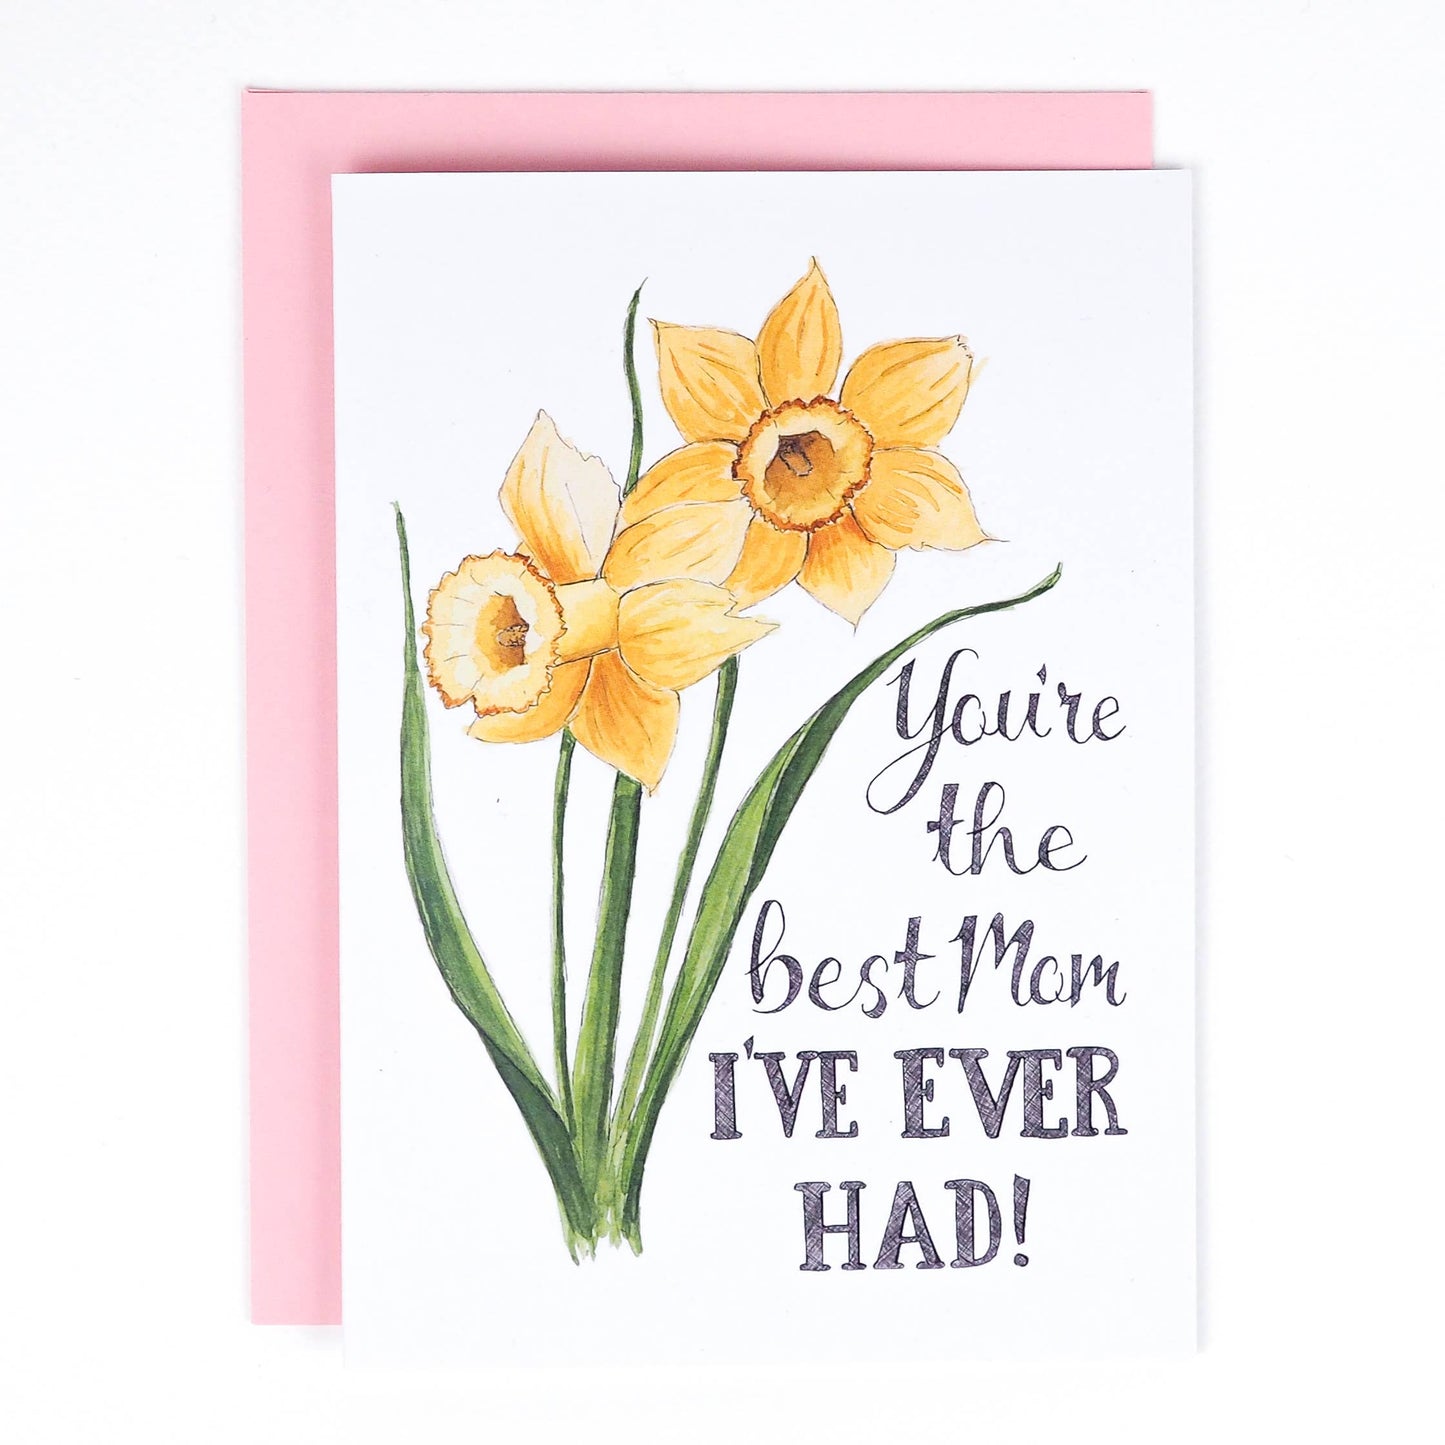 Naughty Florals - You're The Best Mom I've Ever Had Card